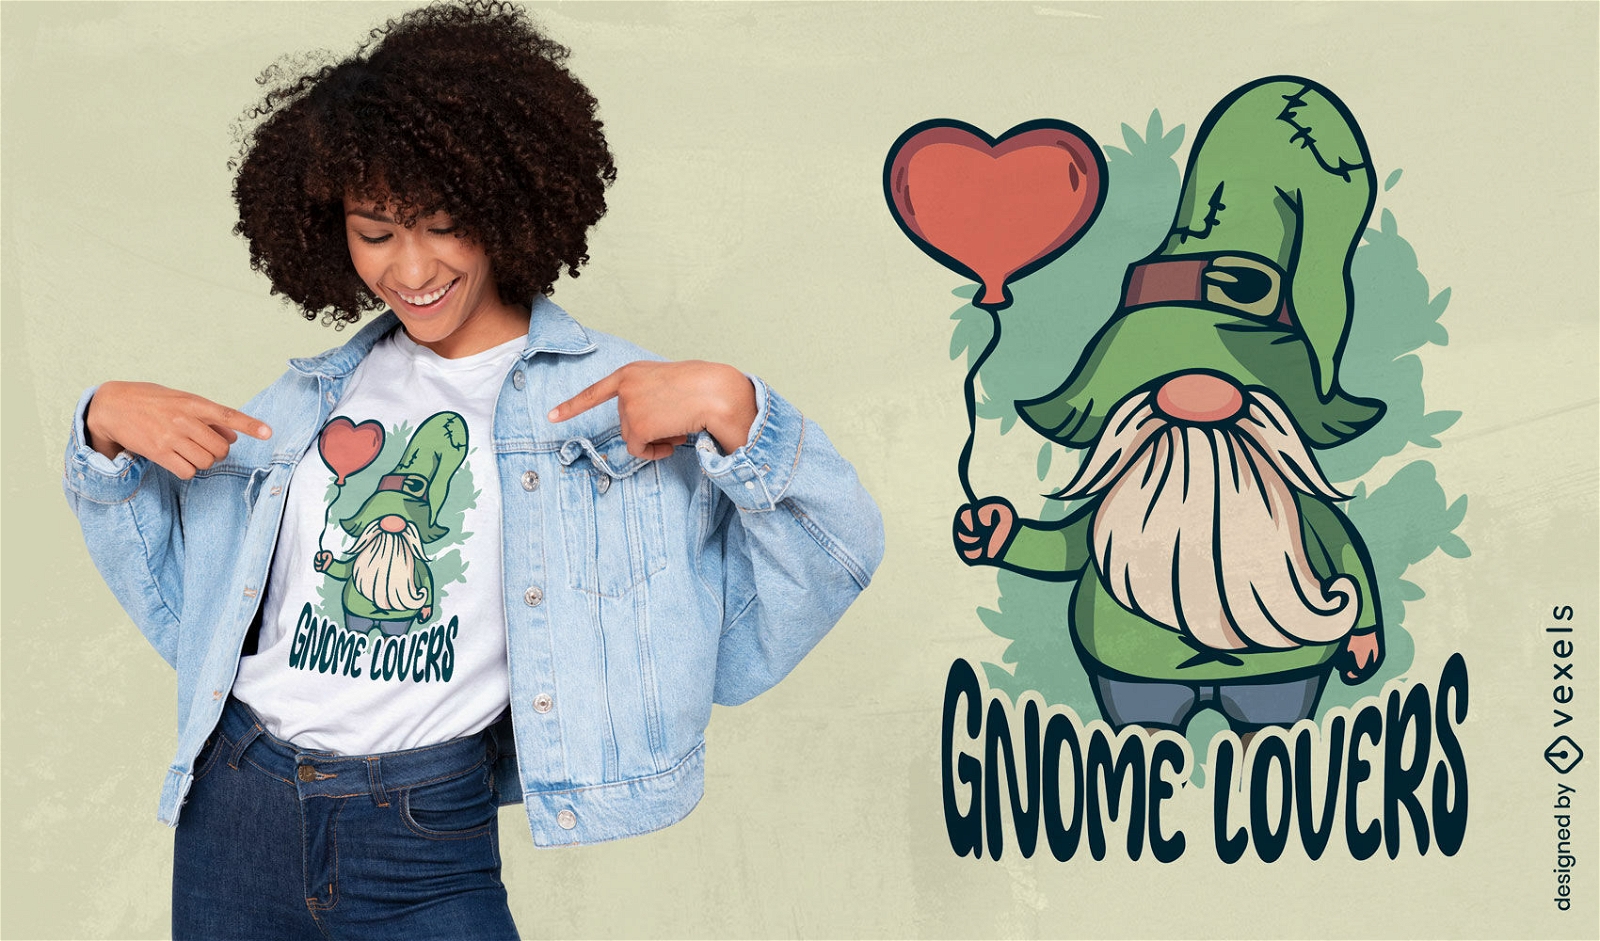 Gnome lovers t-shirt design